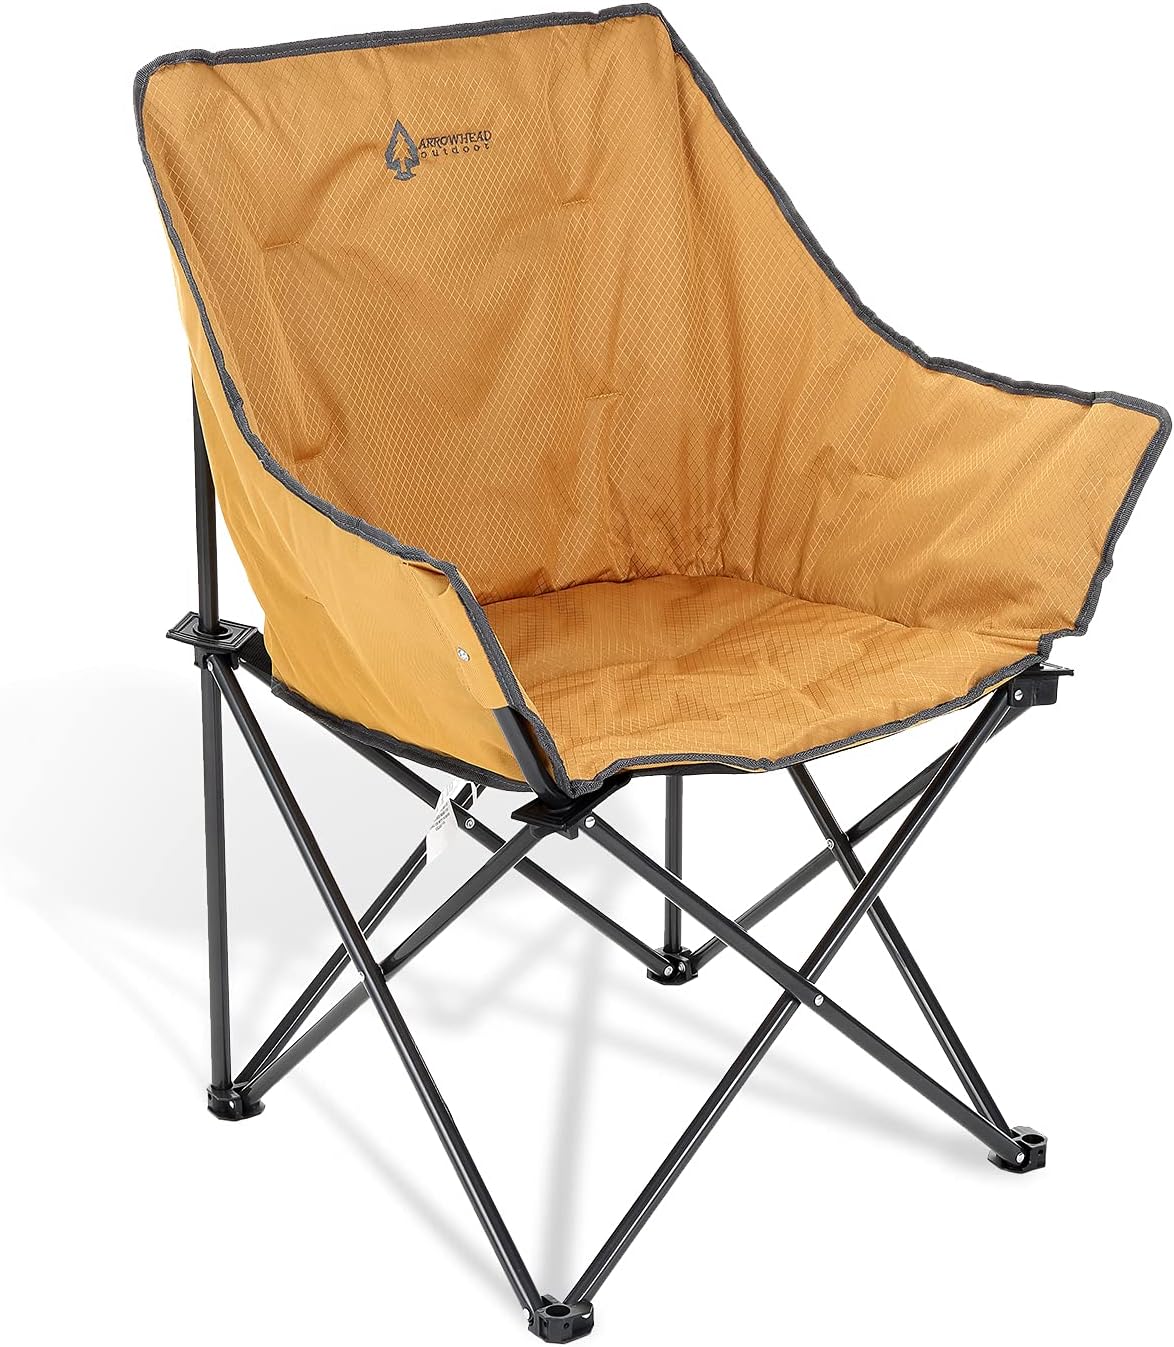 ARROWHEAD OUTDOOR Multi Function 3 In 1 Compact Camp Chair Backpack, Stool  Insulated Cooler, W External Pockets Storage Bag, Lightweig From 42,71 €